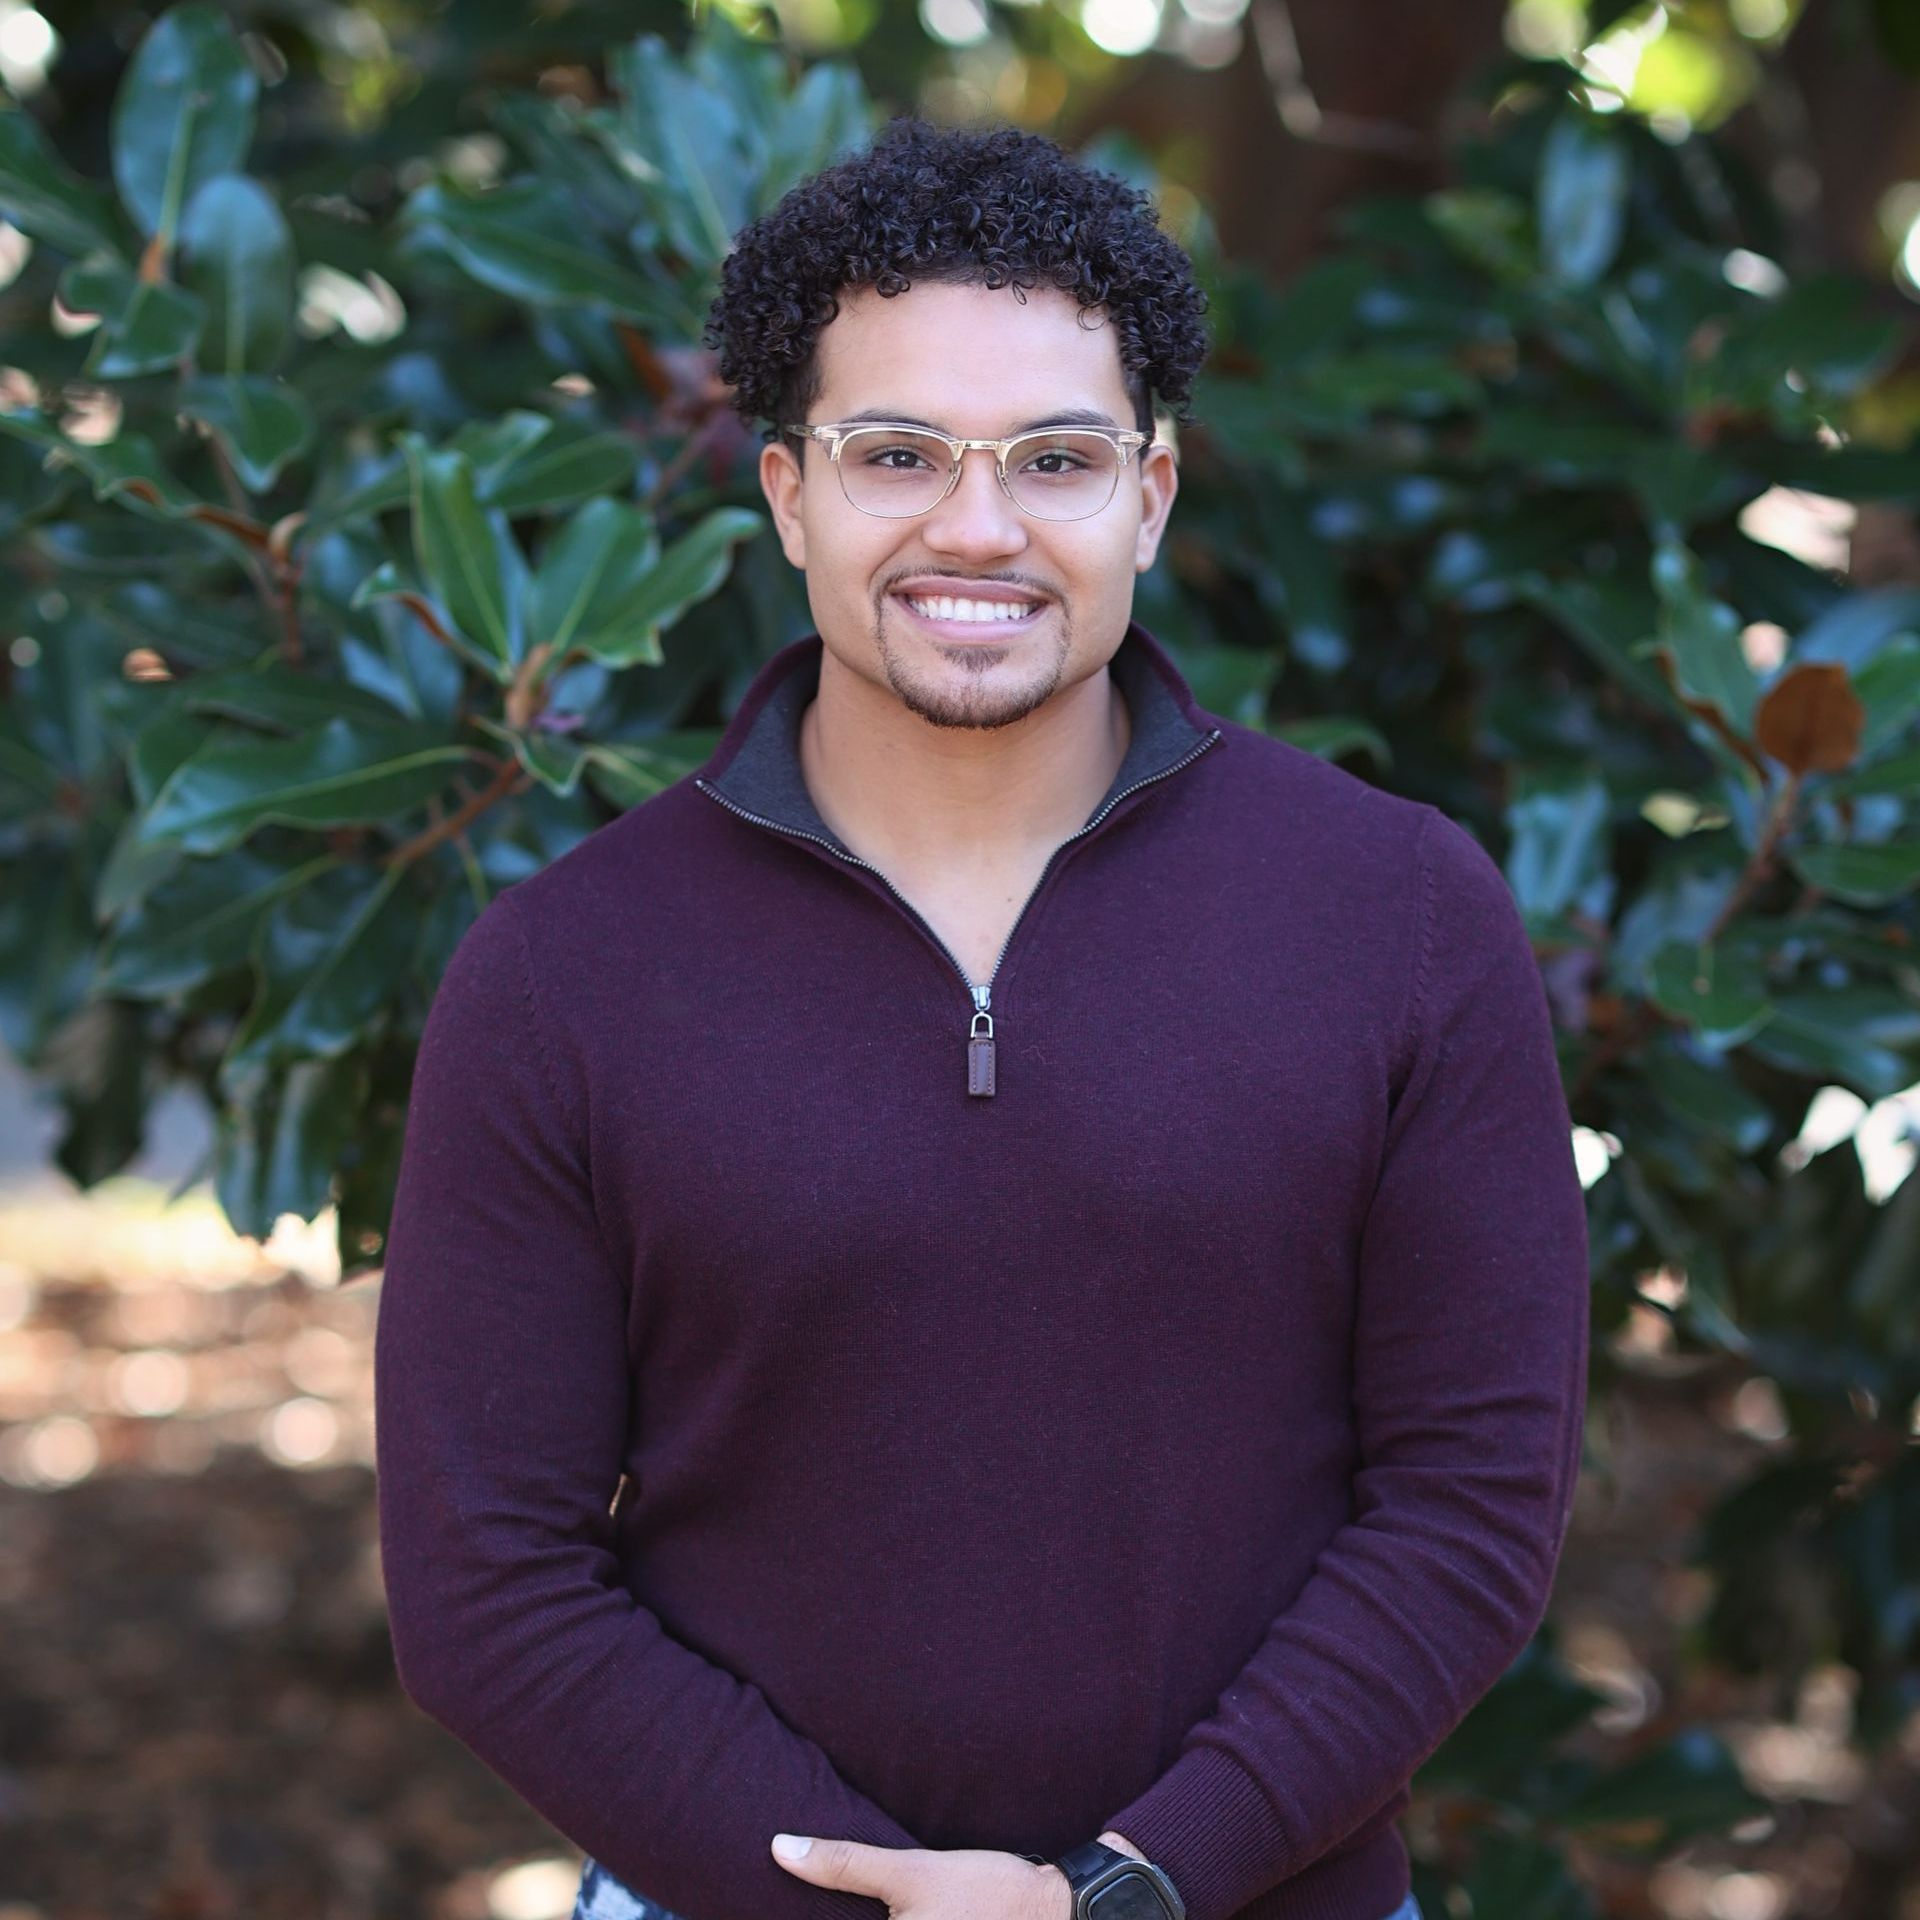 a man wearing glasses and a purple sweater is standing in front of a tree